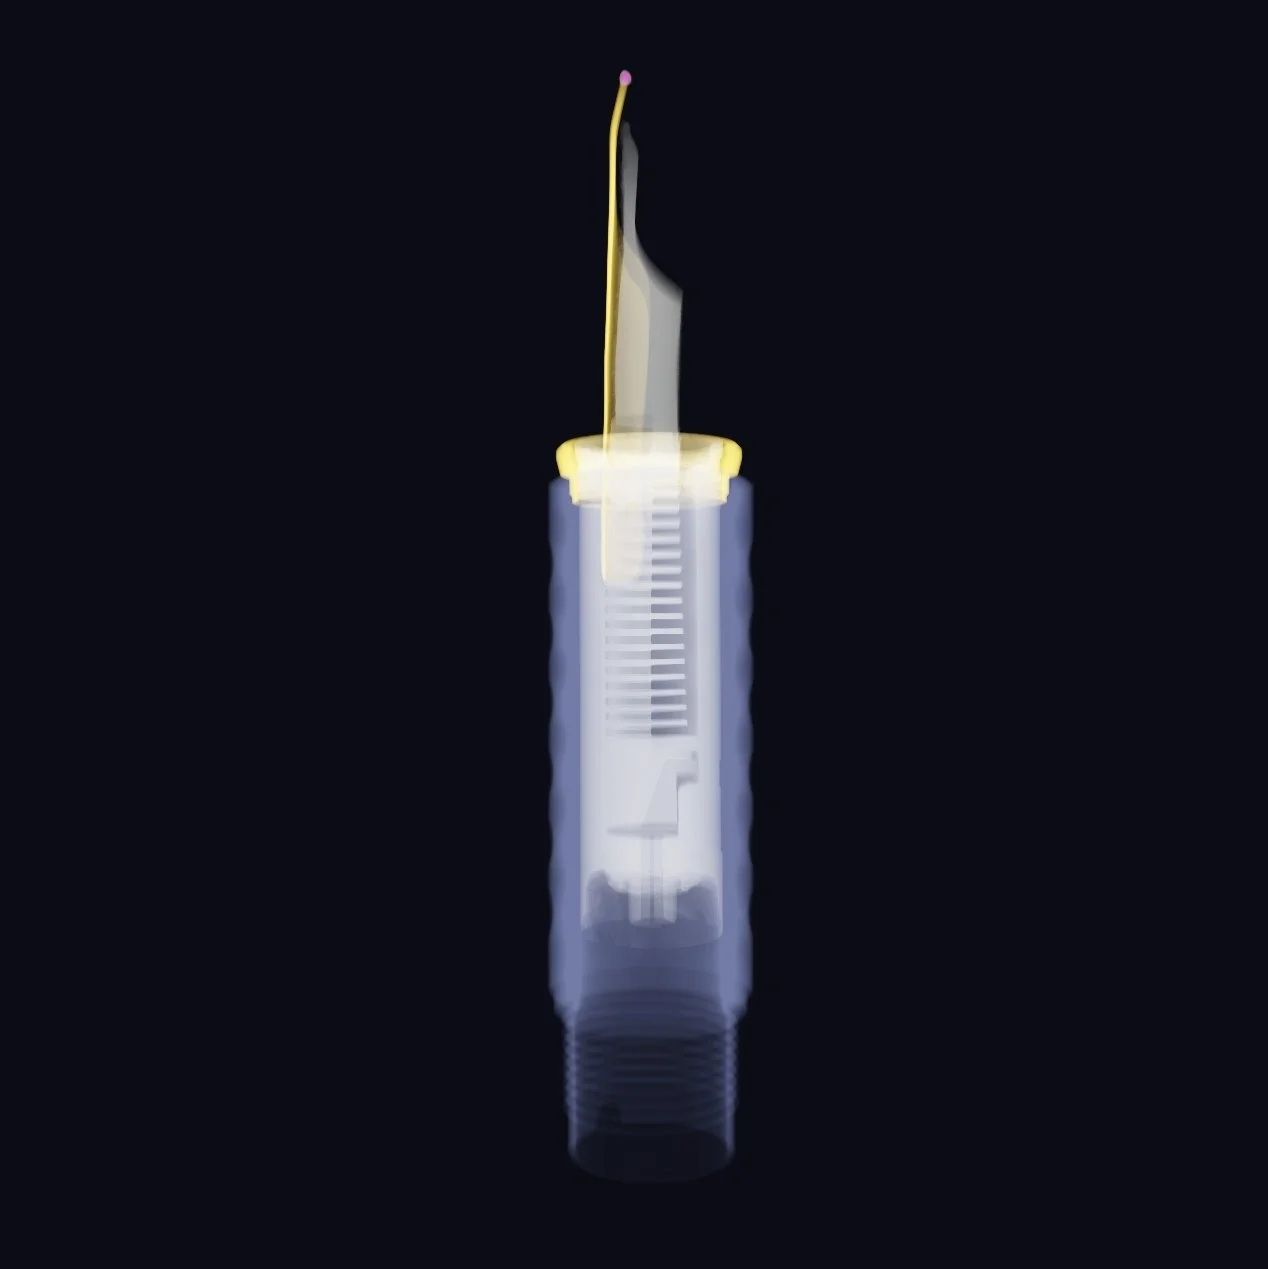 X-Ray renderer image of the pen